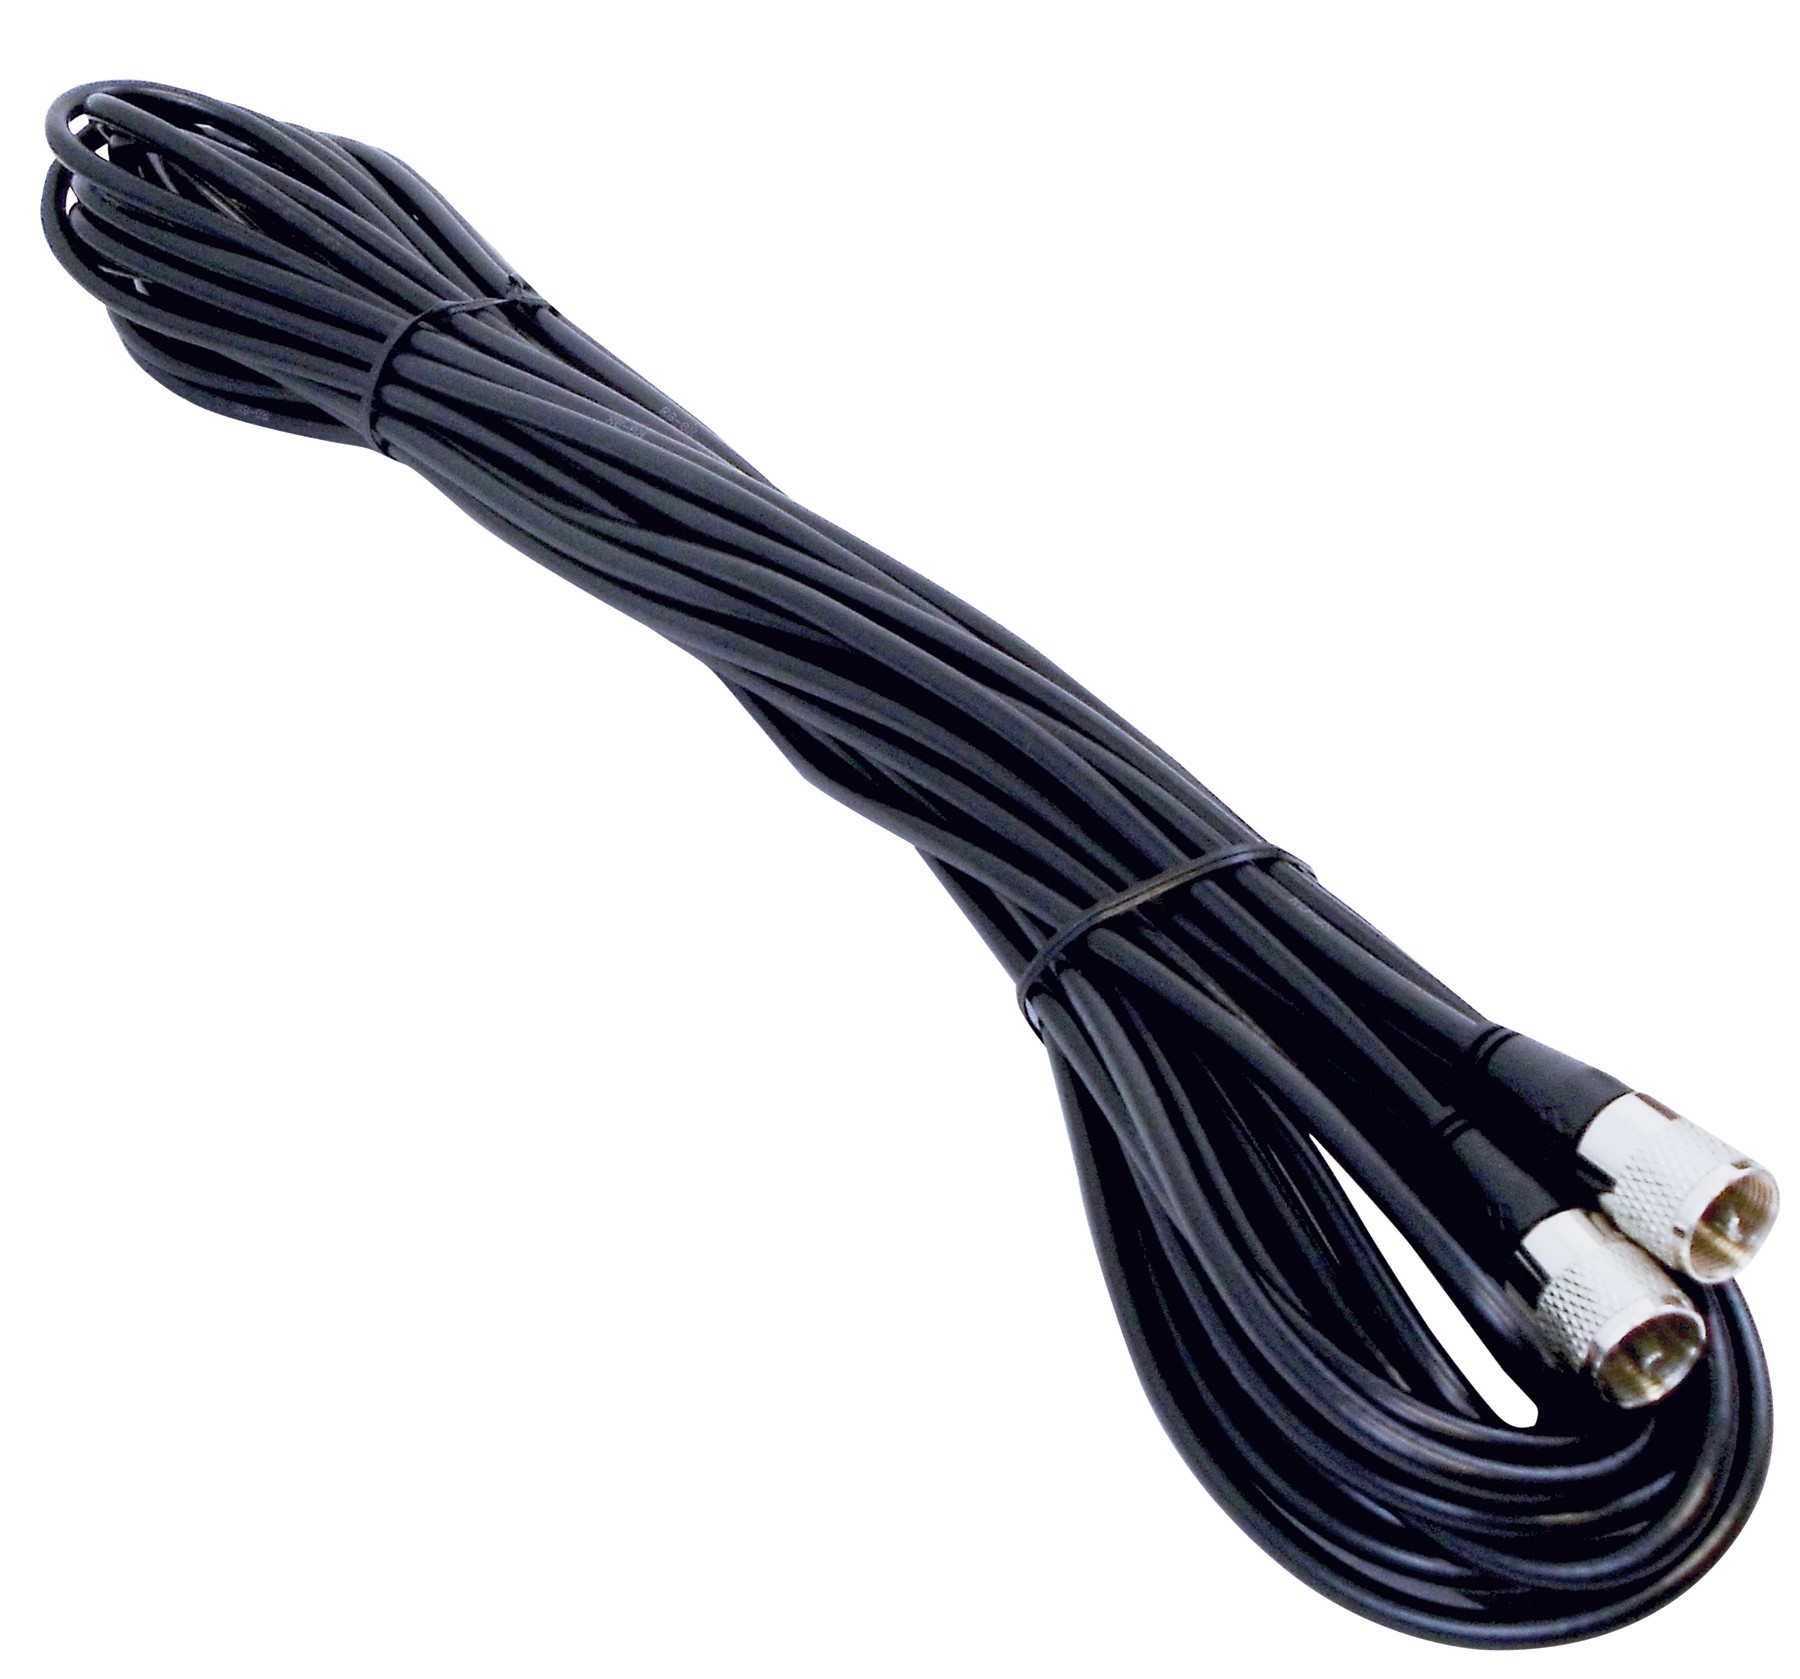 Kalibur 50 Foot Black Rg8X Coax Cable Assembly With Molded Pl259 Connectors On Each End